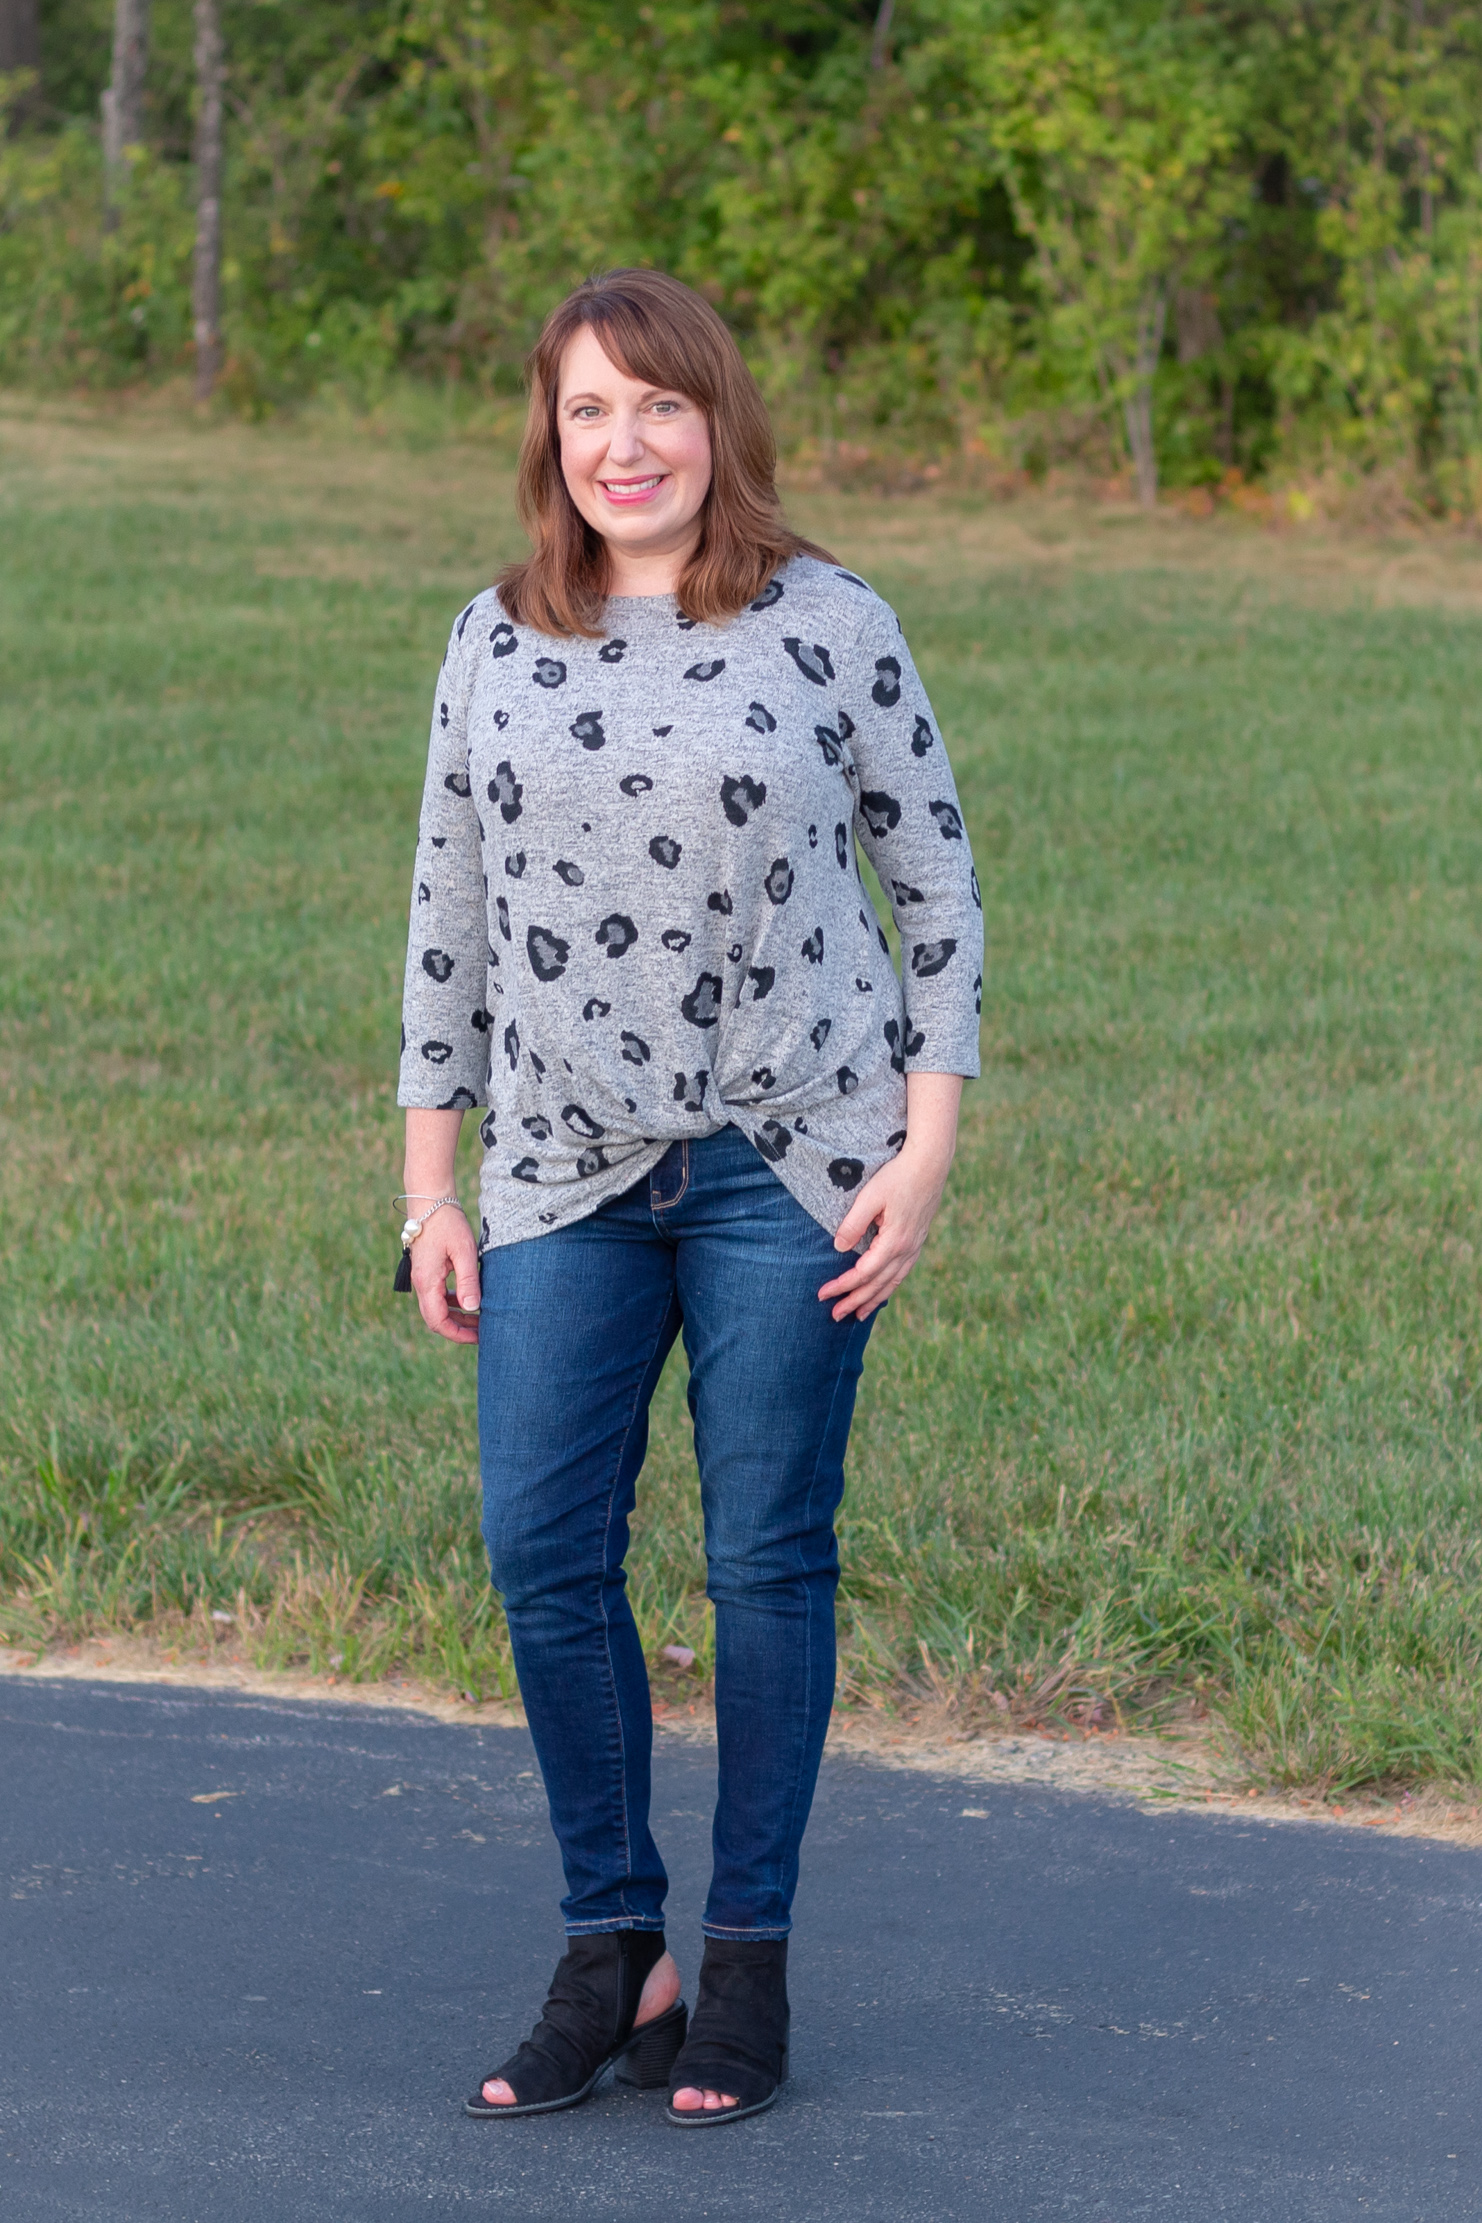 Dianna Wearing a Grey Leopard Print Twist Top, Skinny Jeans, and Black Open Toe Booties